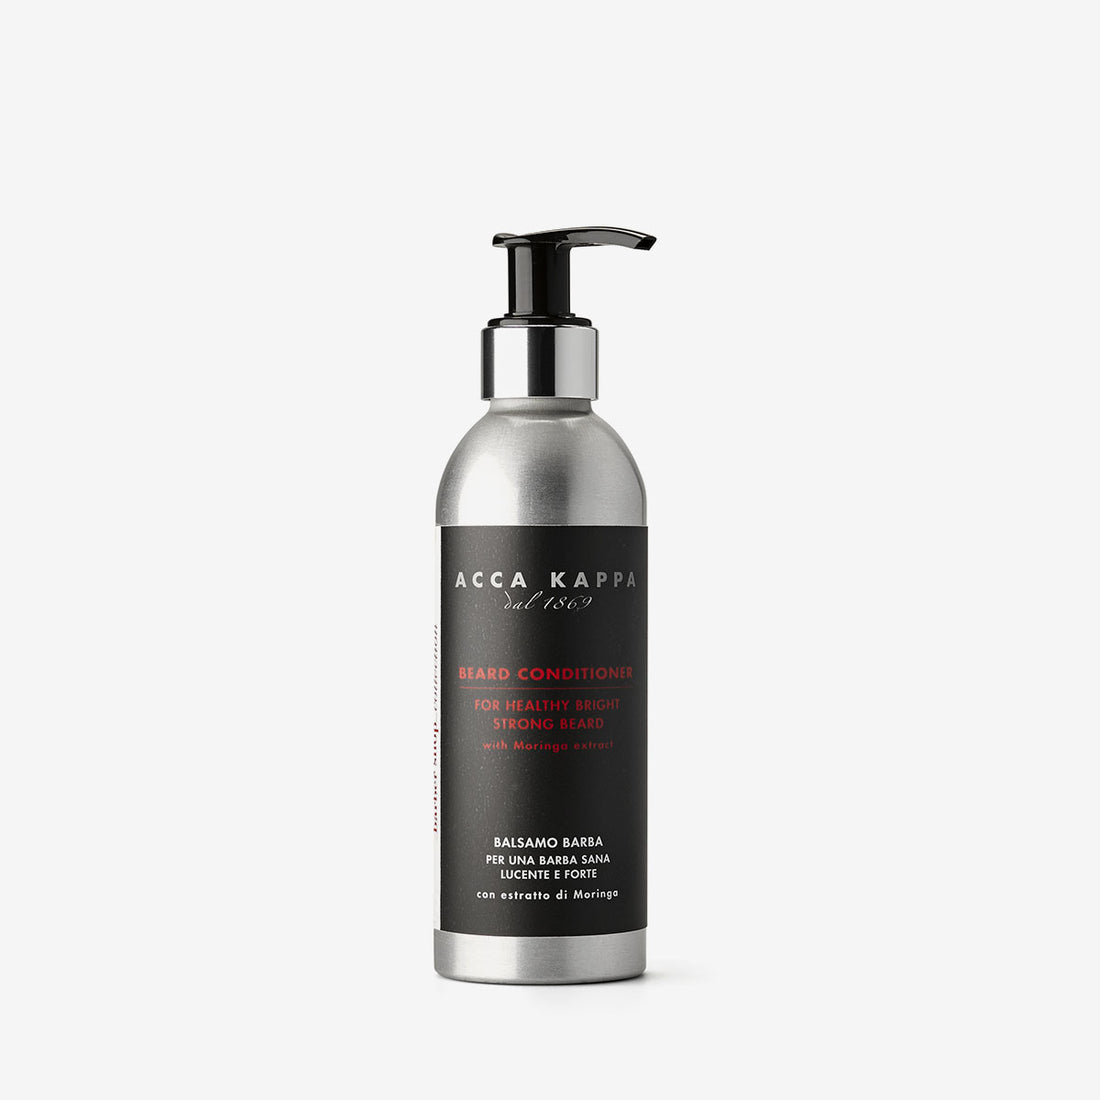 ACCA KAPPA Barber Shop Collection Beard Conditioner (200ml)